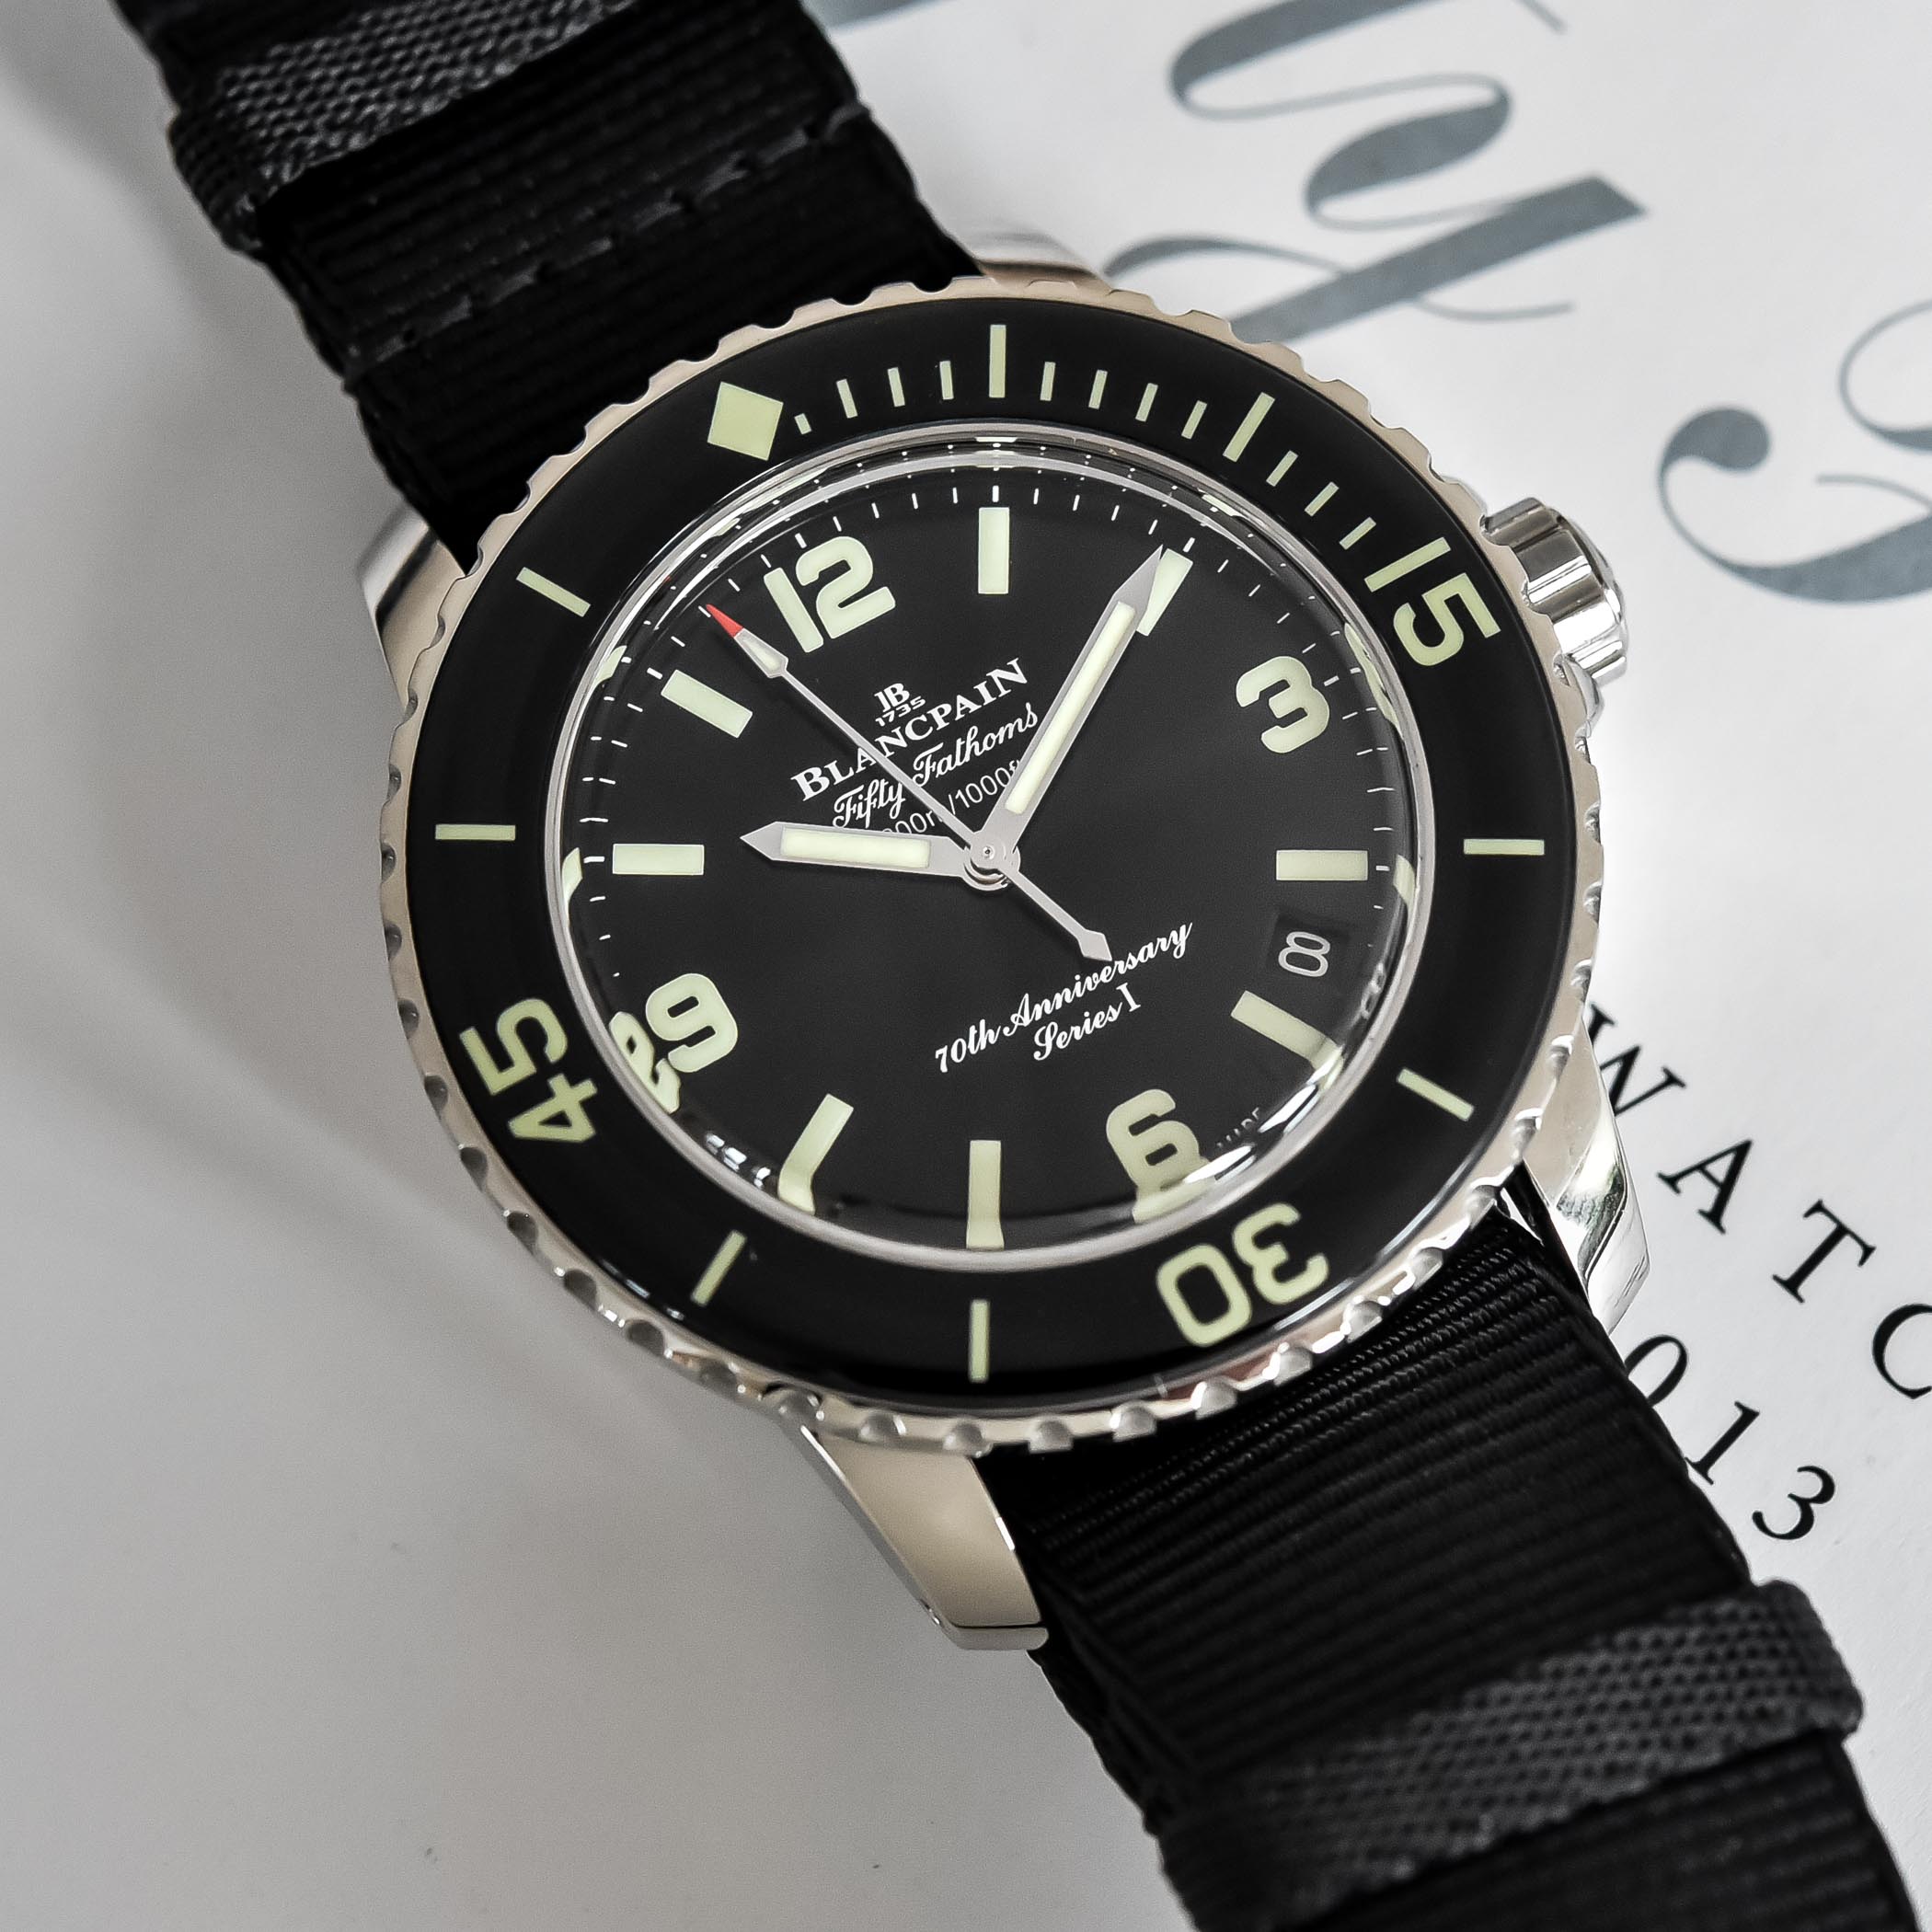 Blancpain Fifty Fathoms 70th Anniversary Limited Edition Act 1 ref 5010